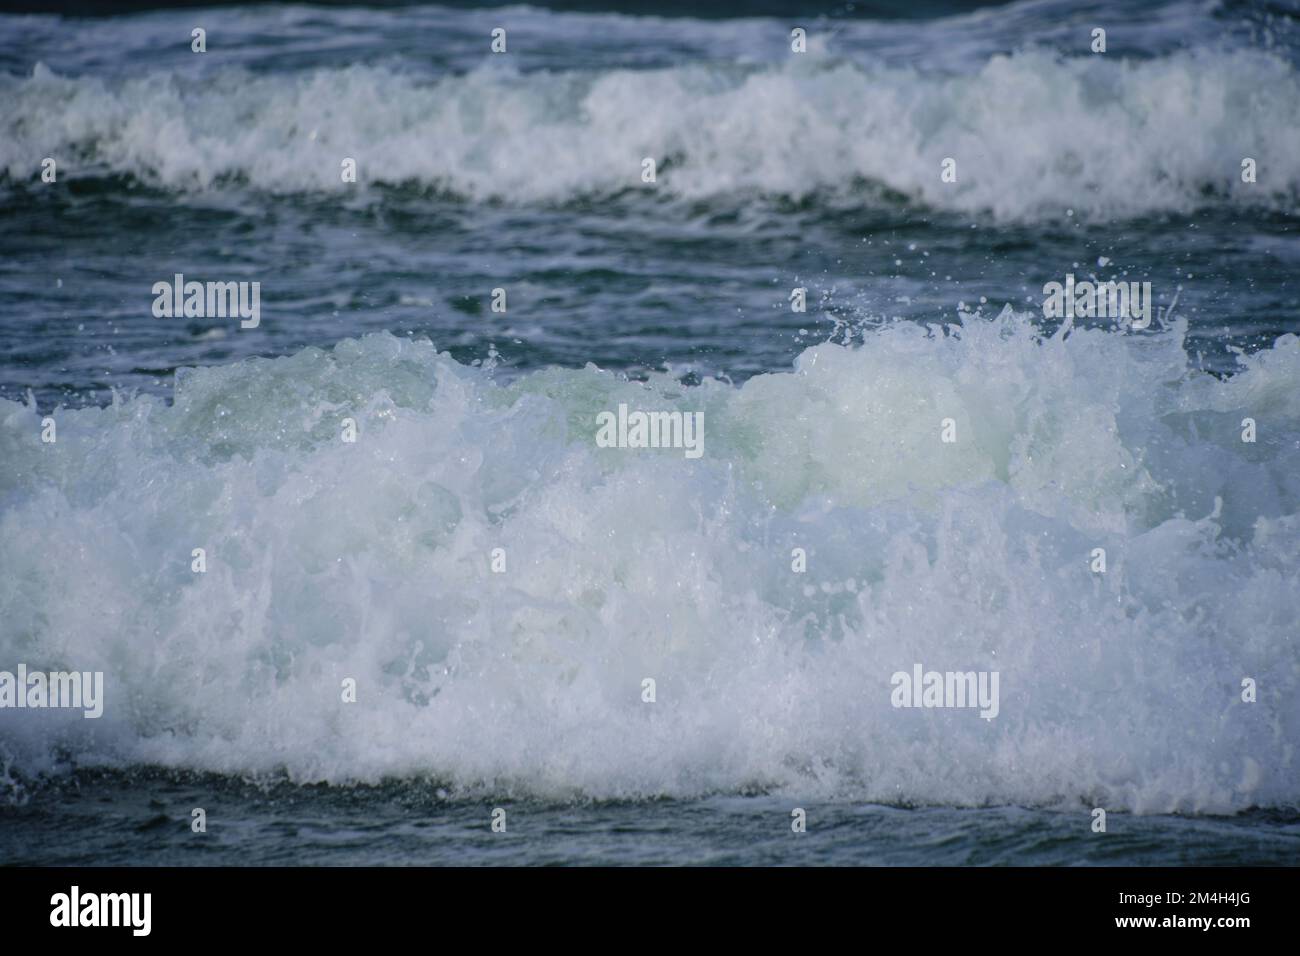 Surf wave with foam splashes on sea Stock Photo